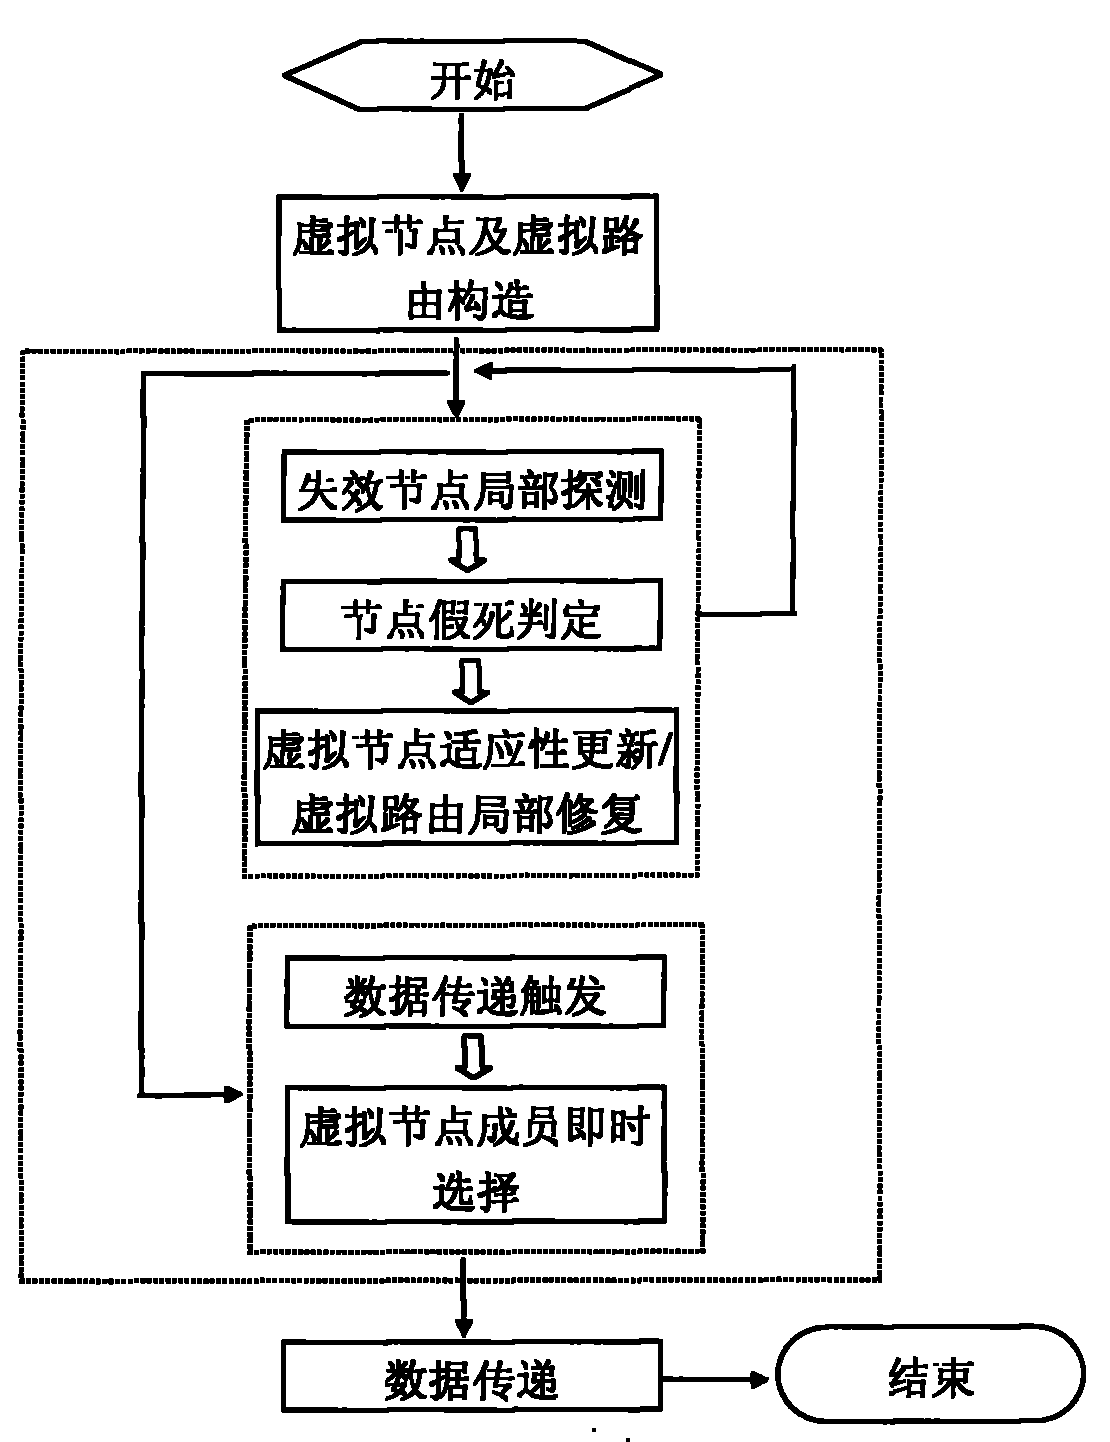 Adaptive route constructing method for wireless Ad Hoc network